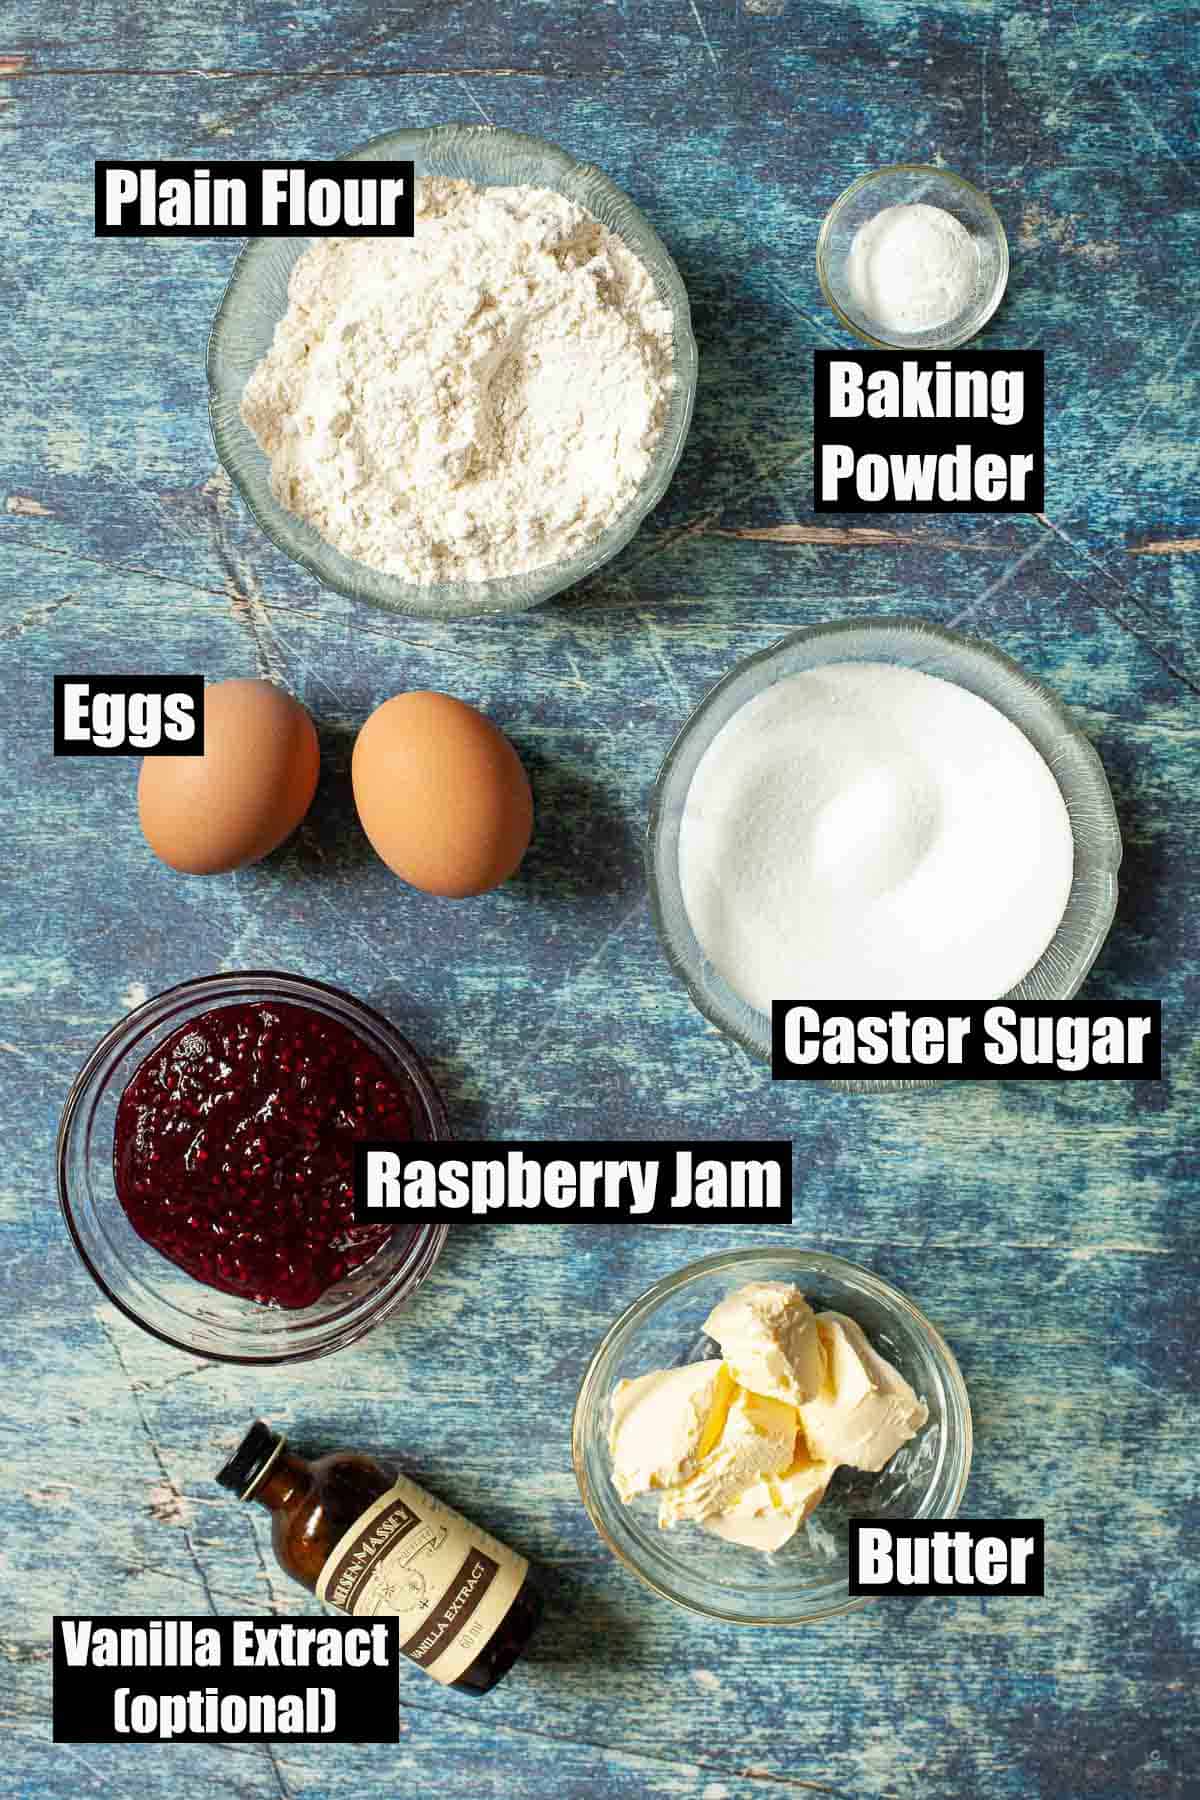 Ingredients for Northamptonshire pudding with text overlay.